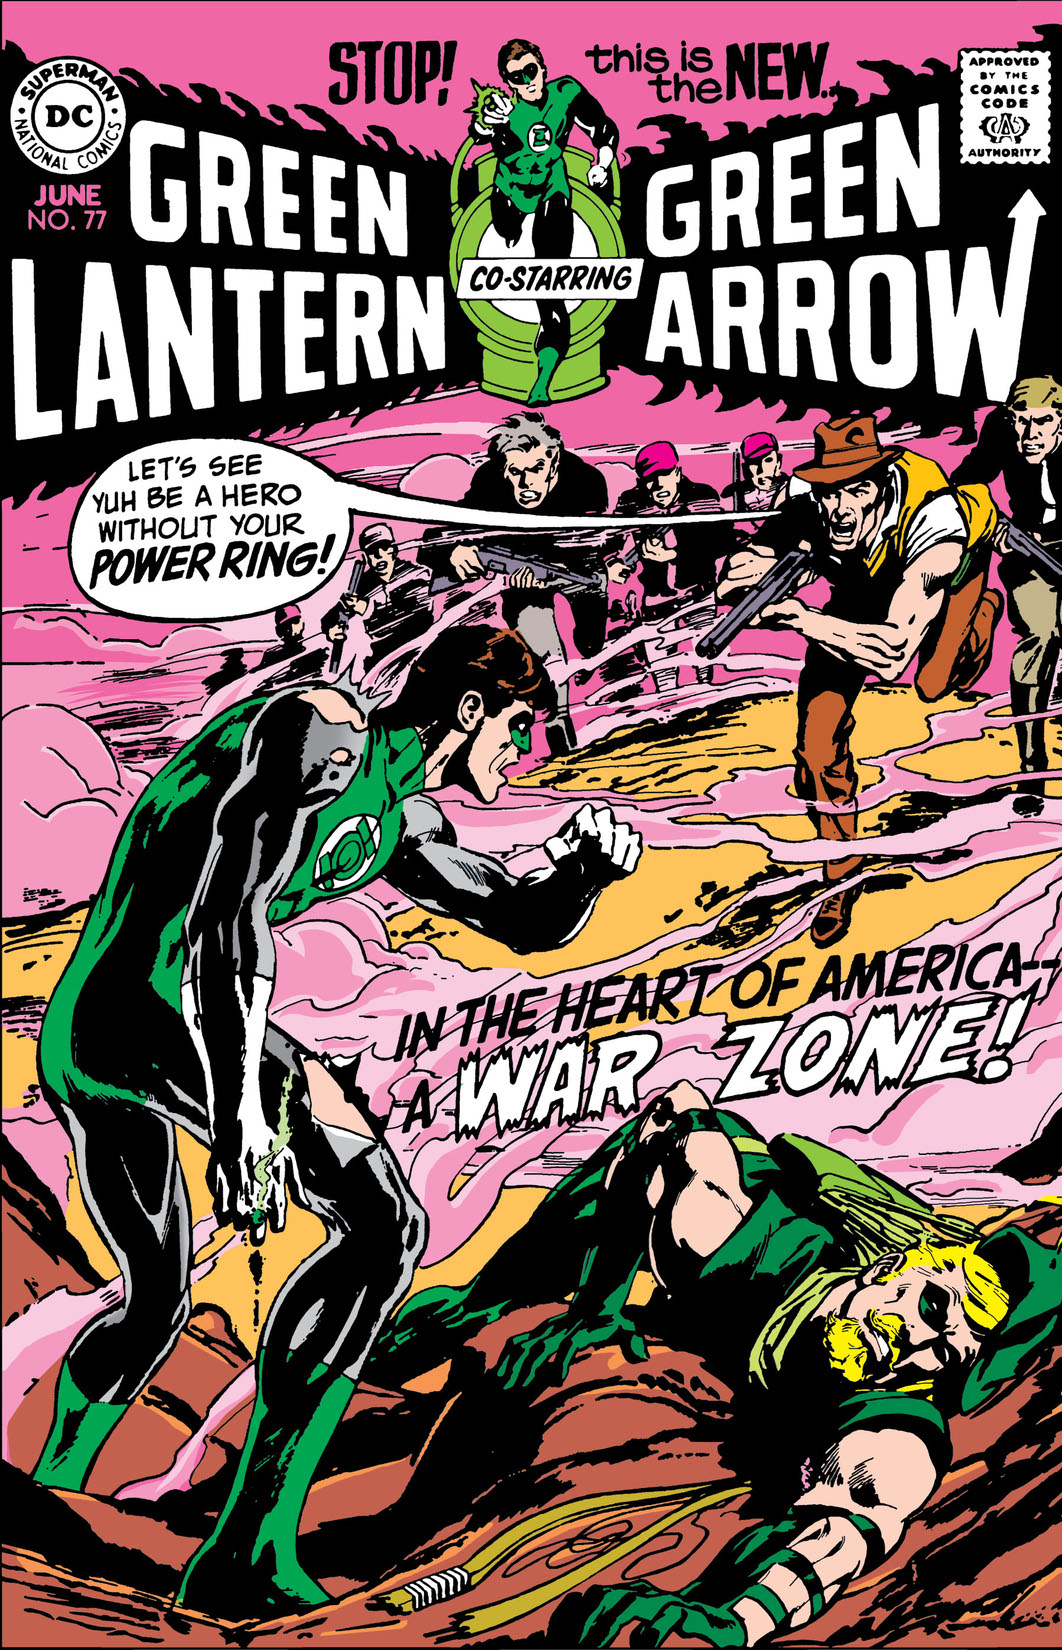 Green Lantern (1960-) #77 preview images